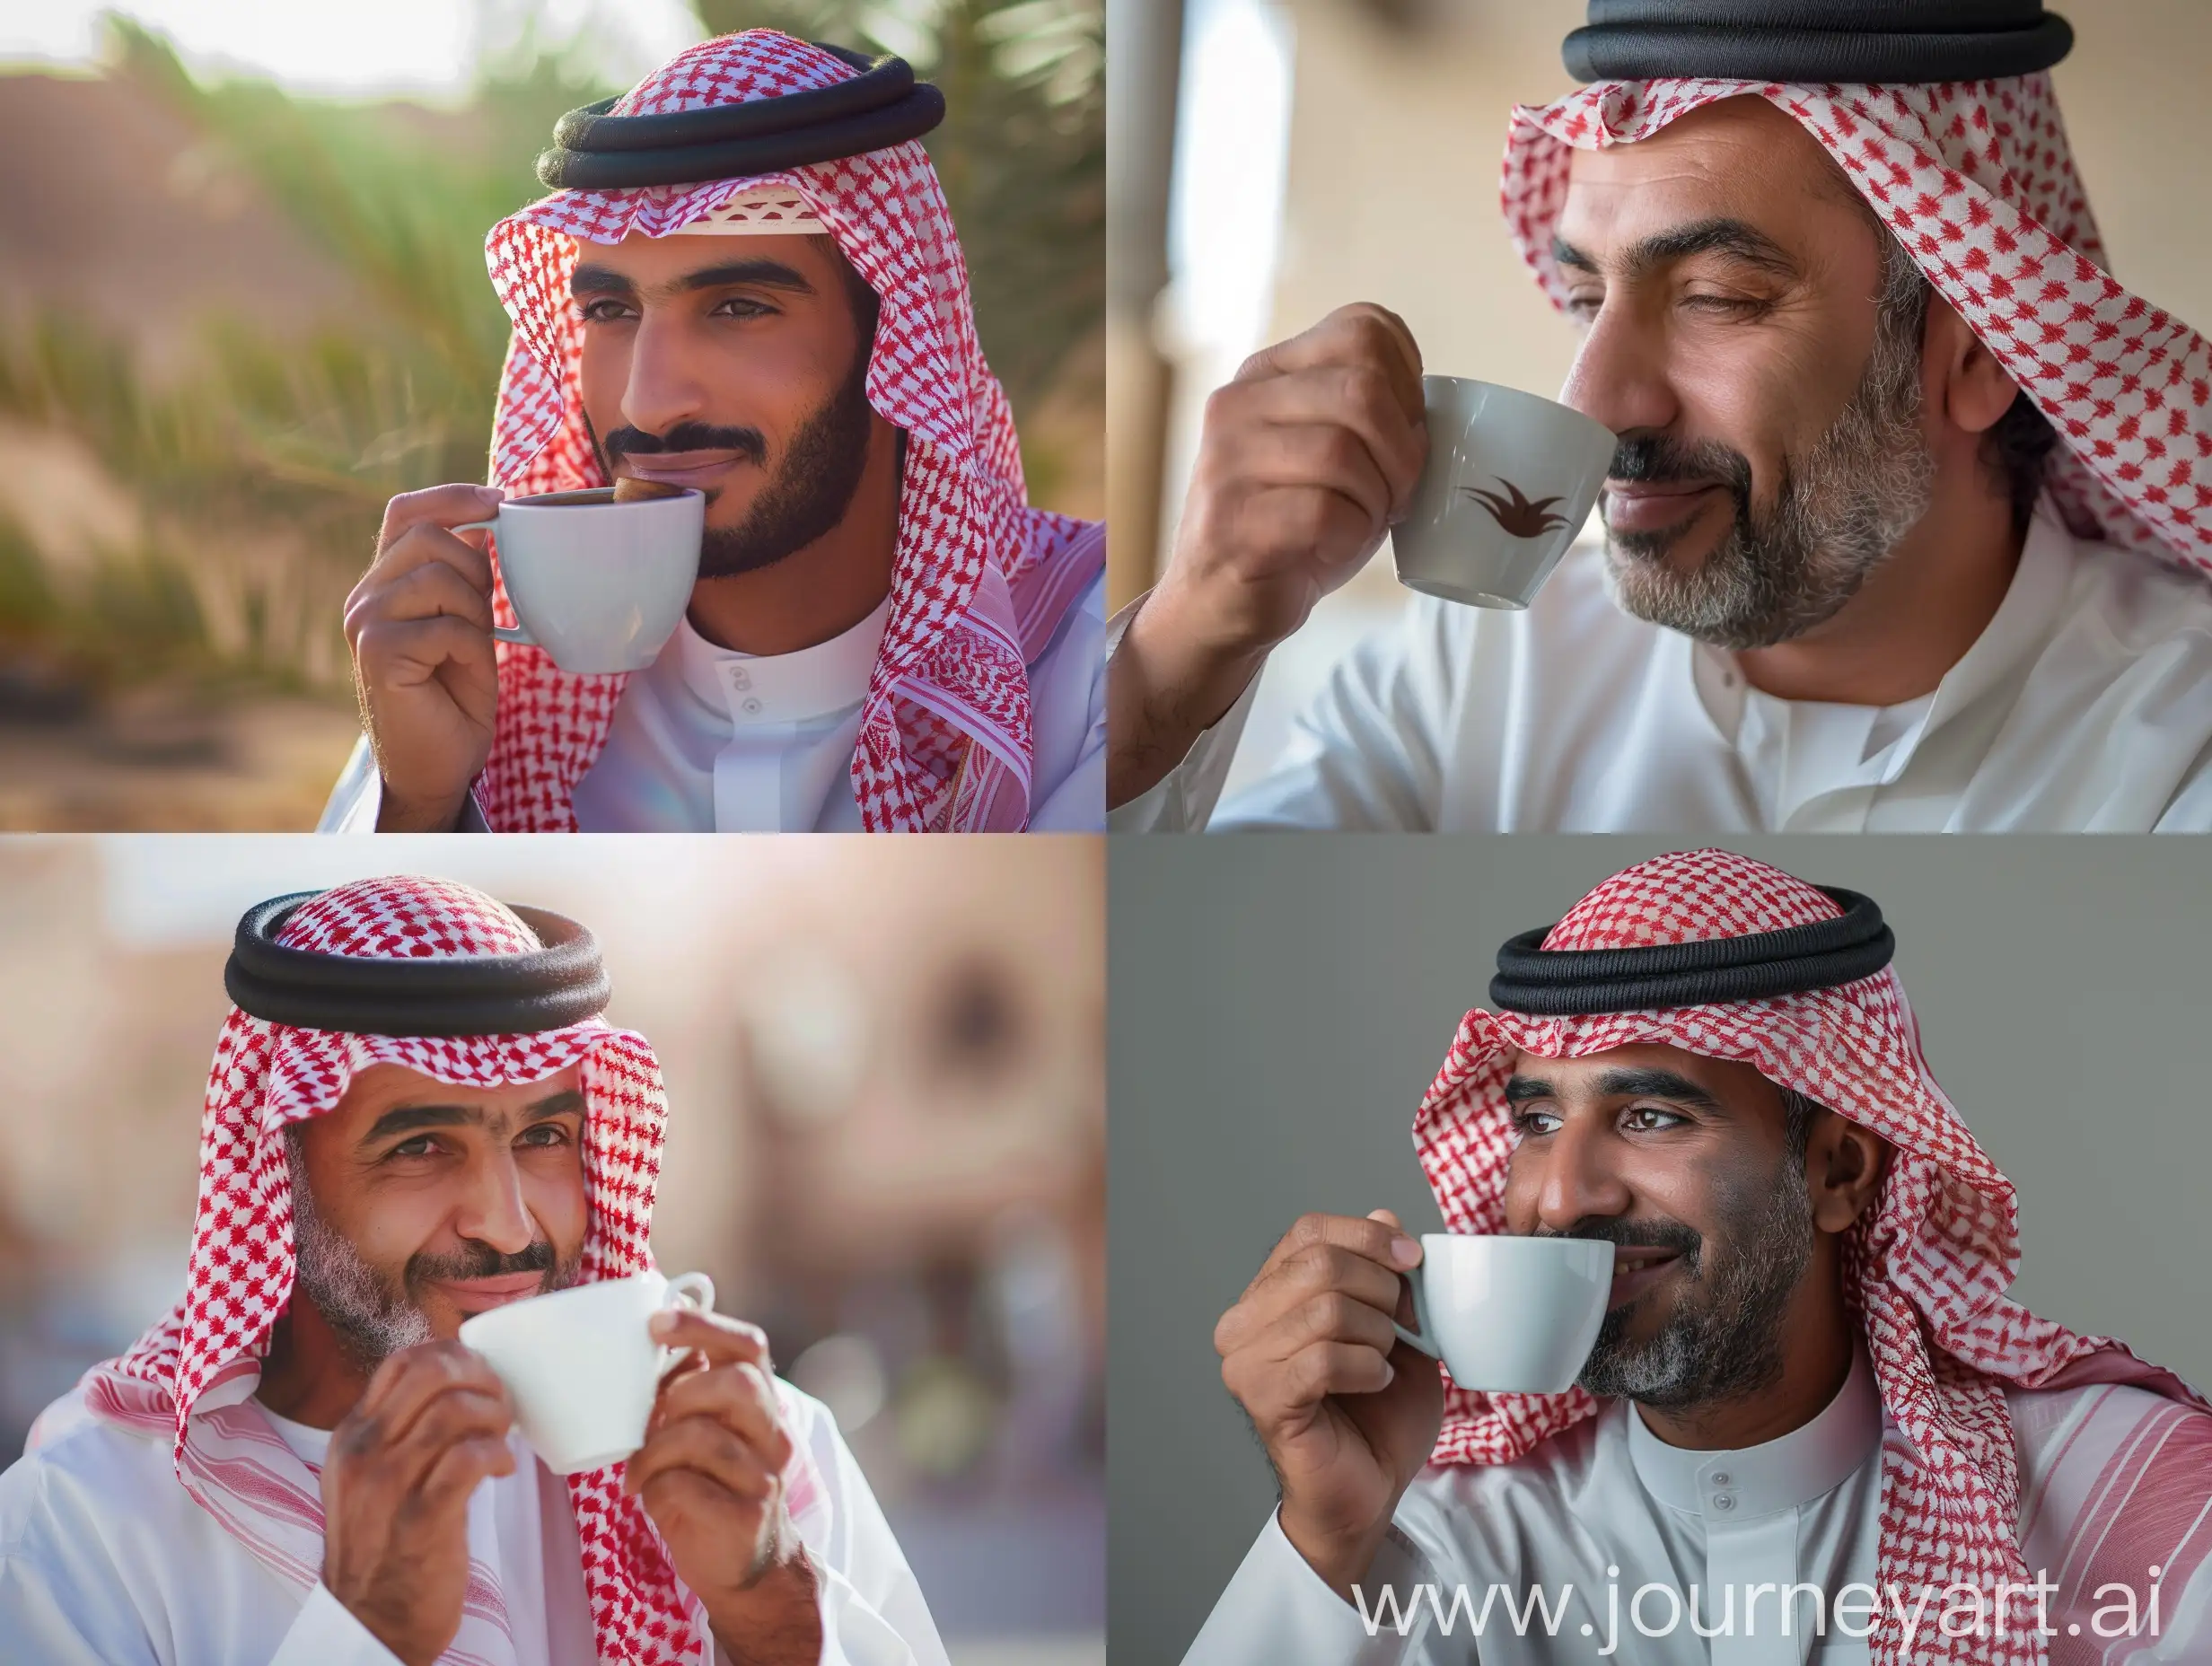 Real photo with natural light of Arab man drinking coffee